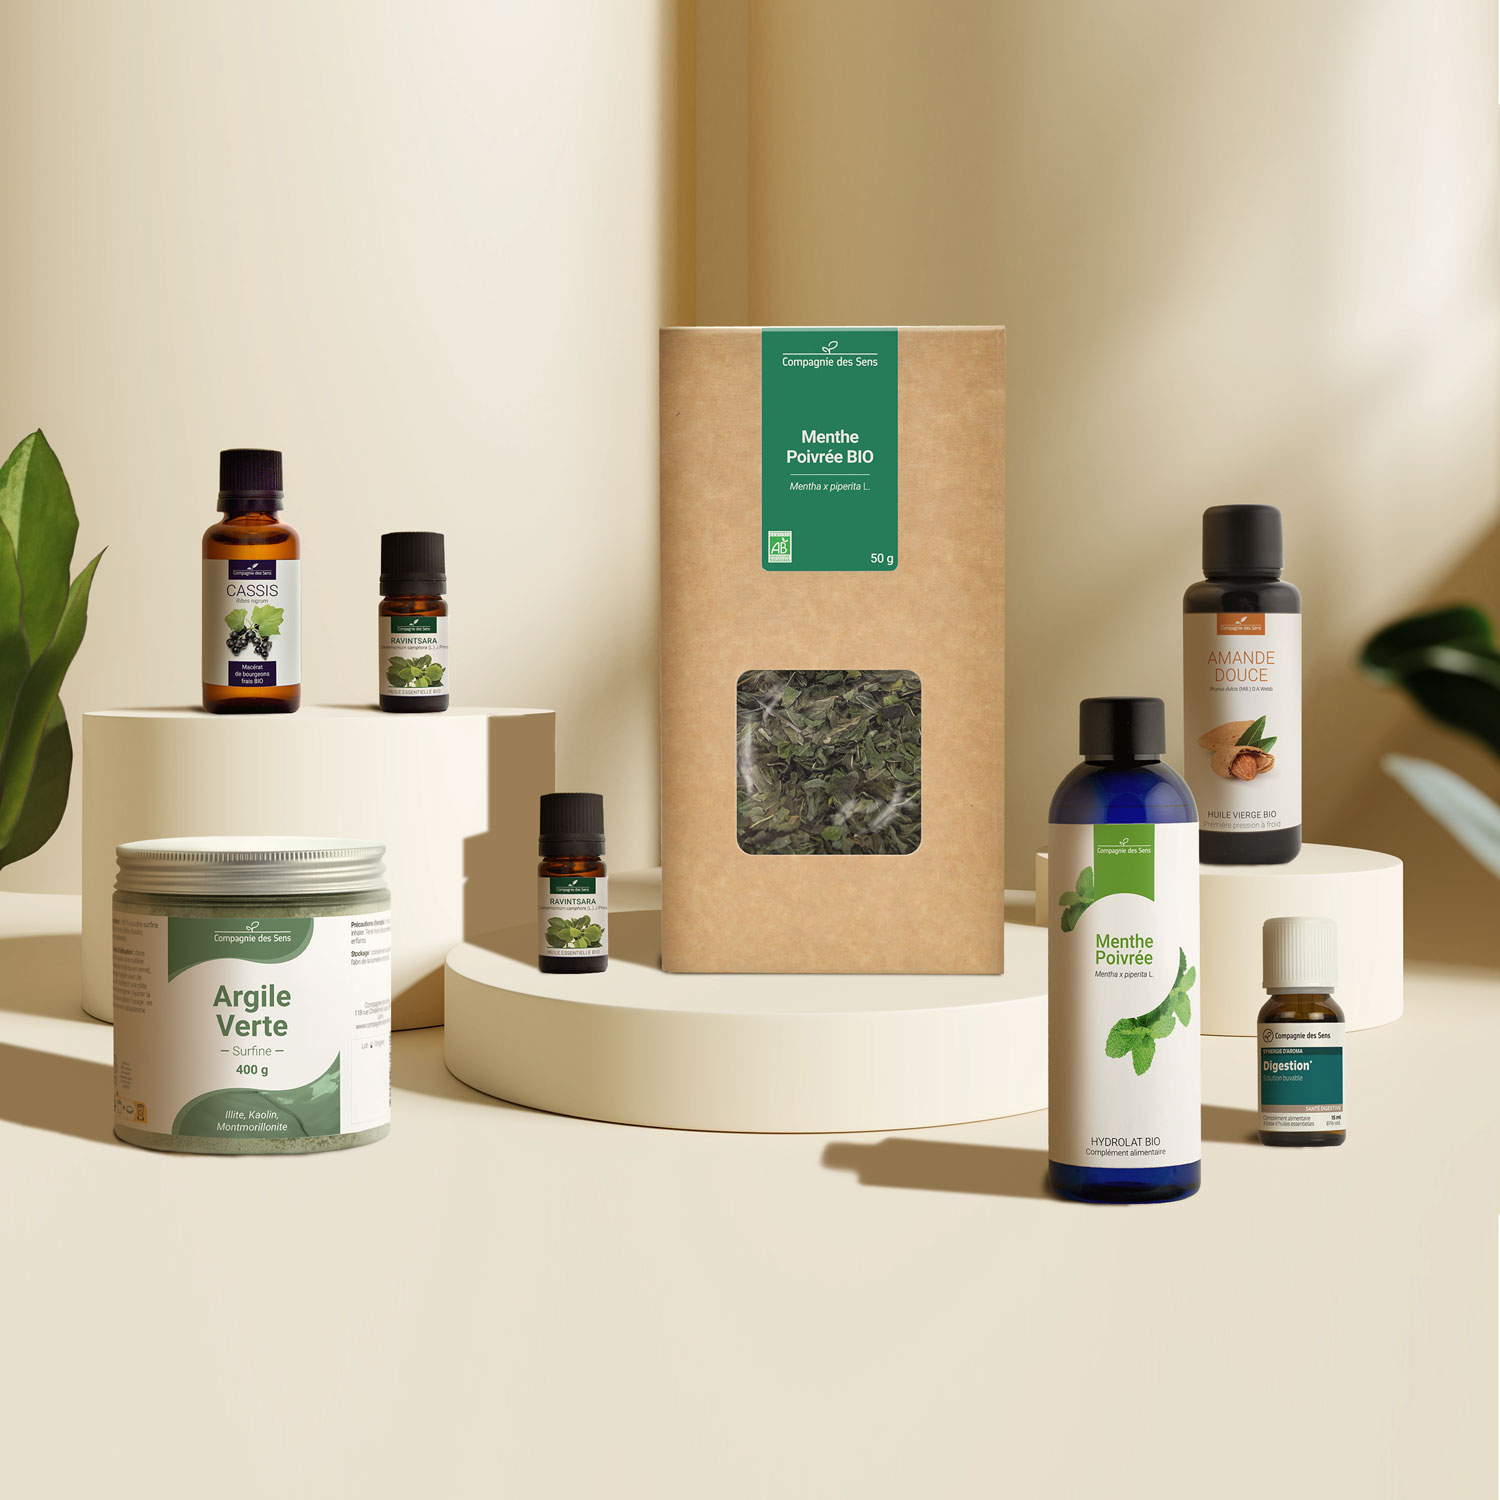 company of the senses products